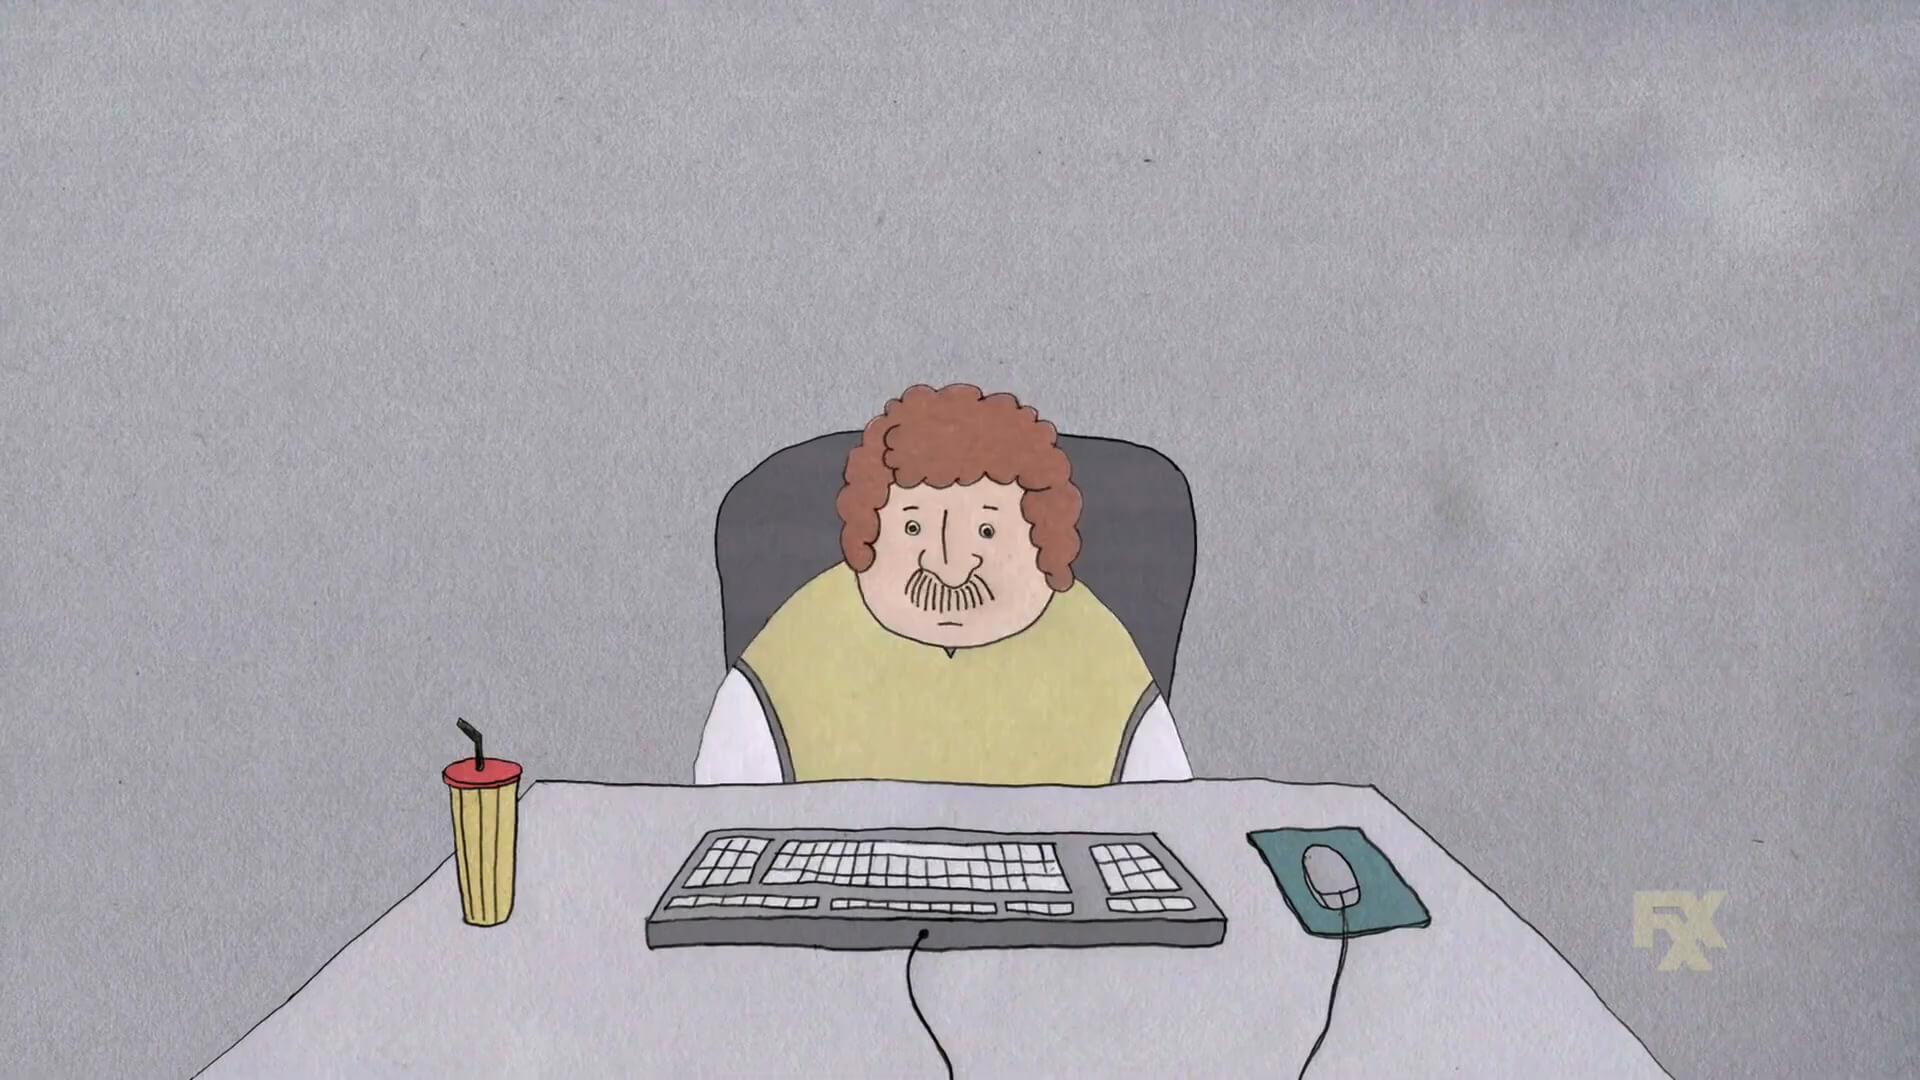 A somber man sits alone at a computer keyboard in a short animation from FXX's CAKE